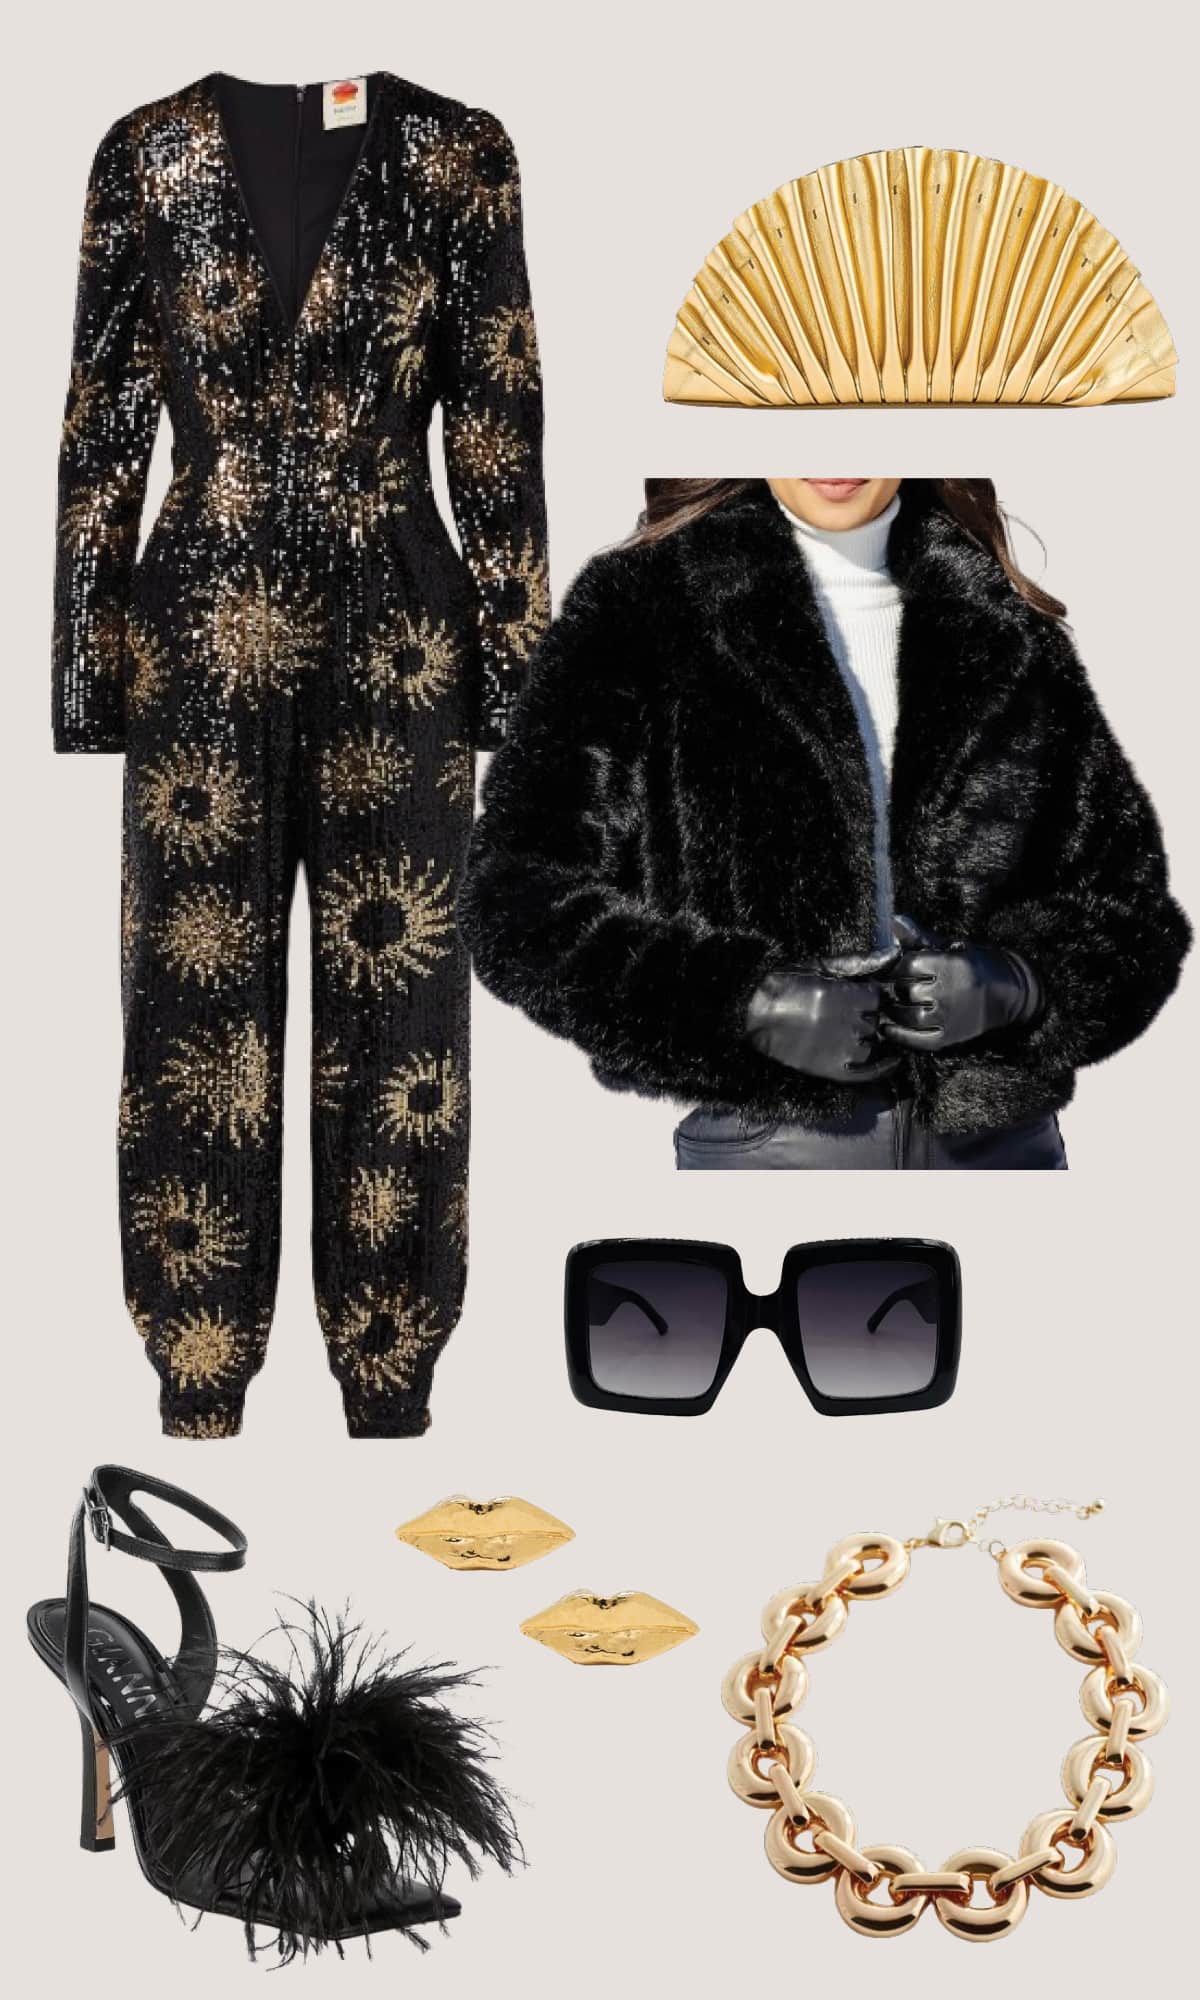 Mob Wife Aesthetic Fashion Trend Ideas - sequin jumpsuit, gold earrings and glam